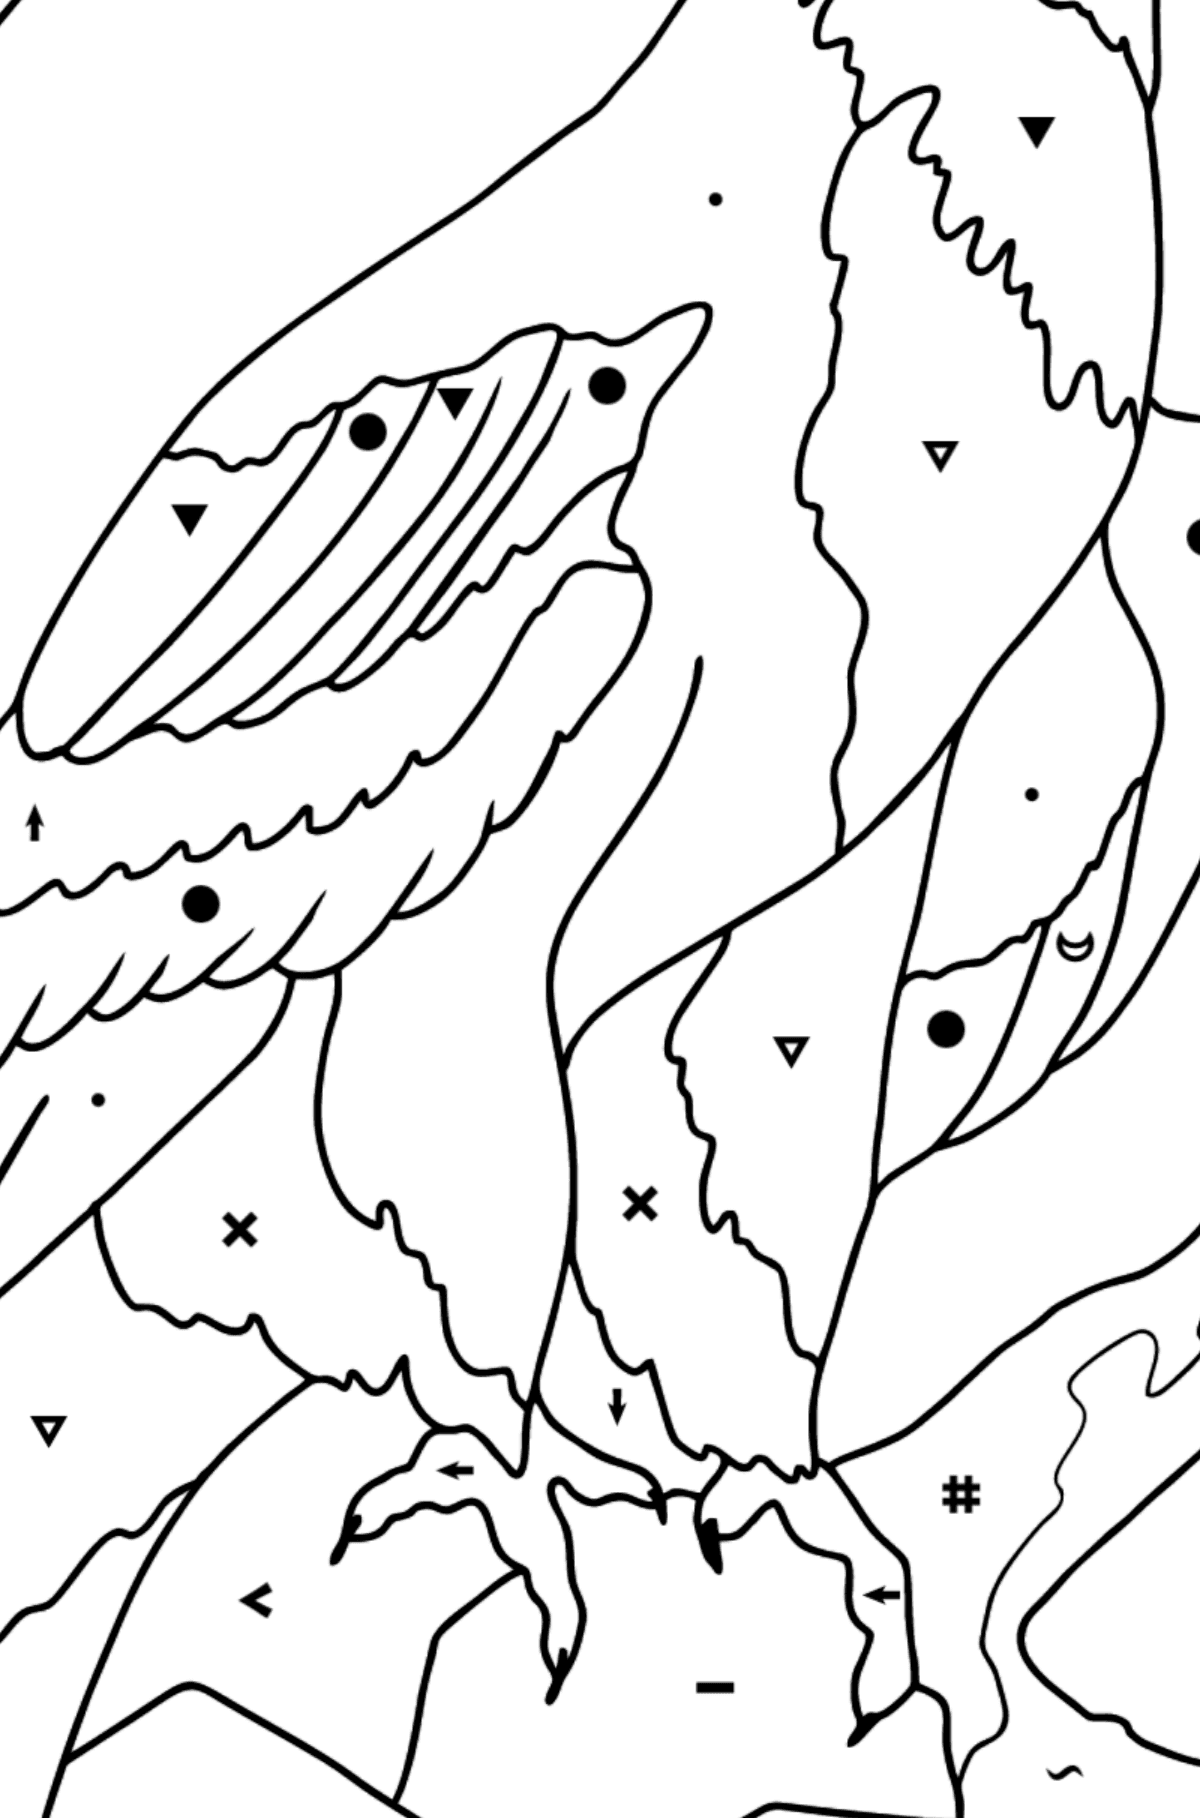 Coloring Page - An Eagle is Looking for Prey - Coloring by Symbols for Kids